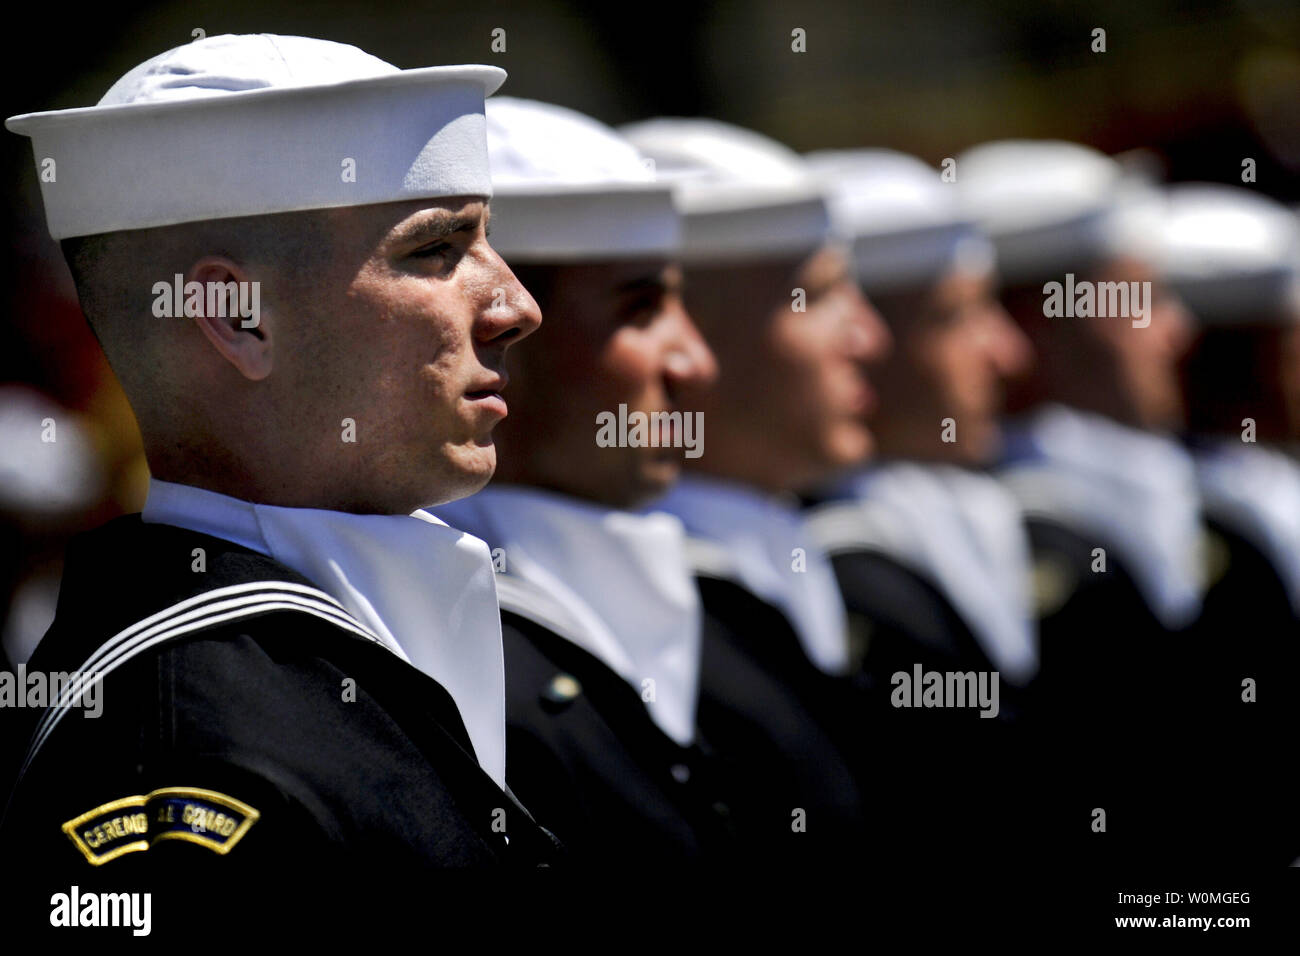 Sailors assigned to the U.S. ceremonial guard stand at attention during a ceremony celebrating the 117th birthday of the chief petty officer rank at the U.S. Navy Memorial, in Washington on April 1, 2010. UPI/Kevin S. O'Brien/U.S. Navy . Stock Photo